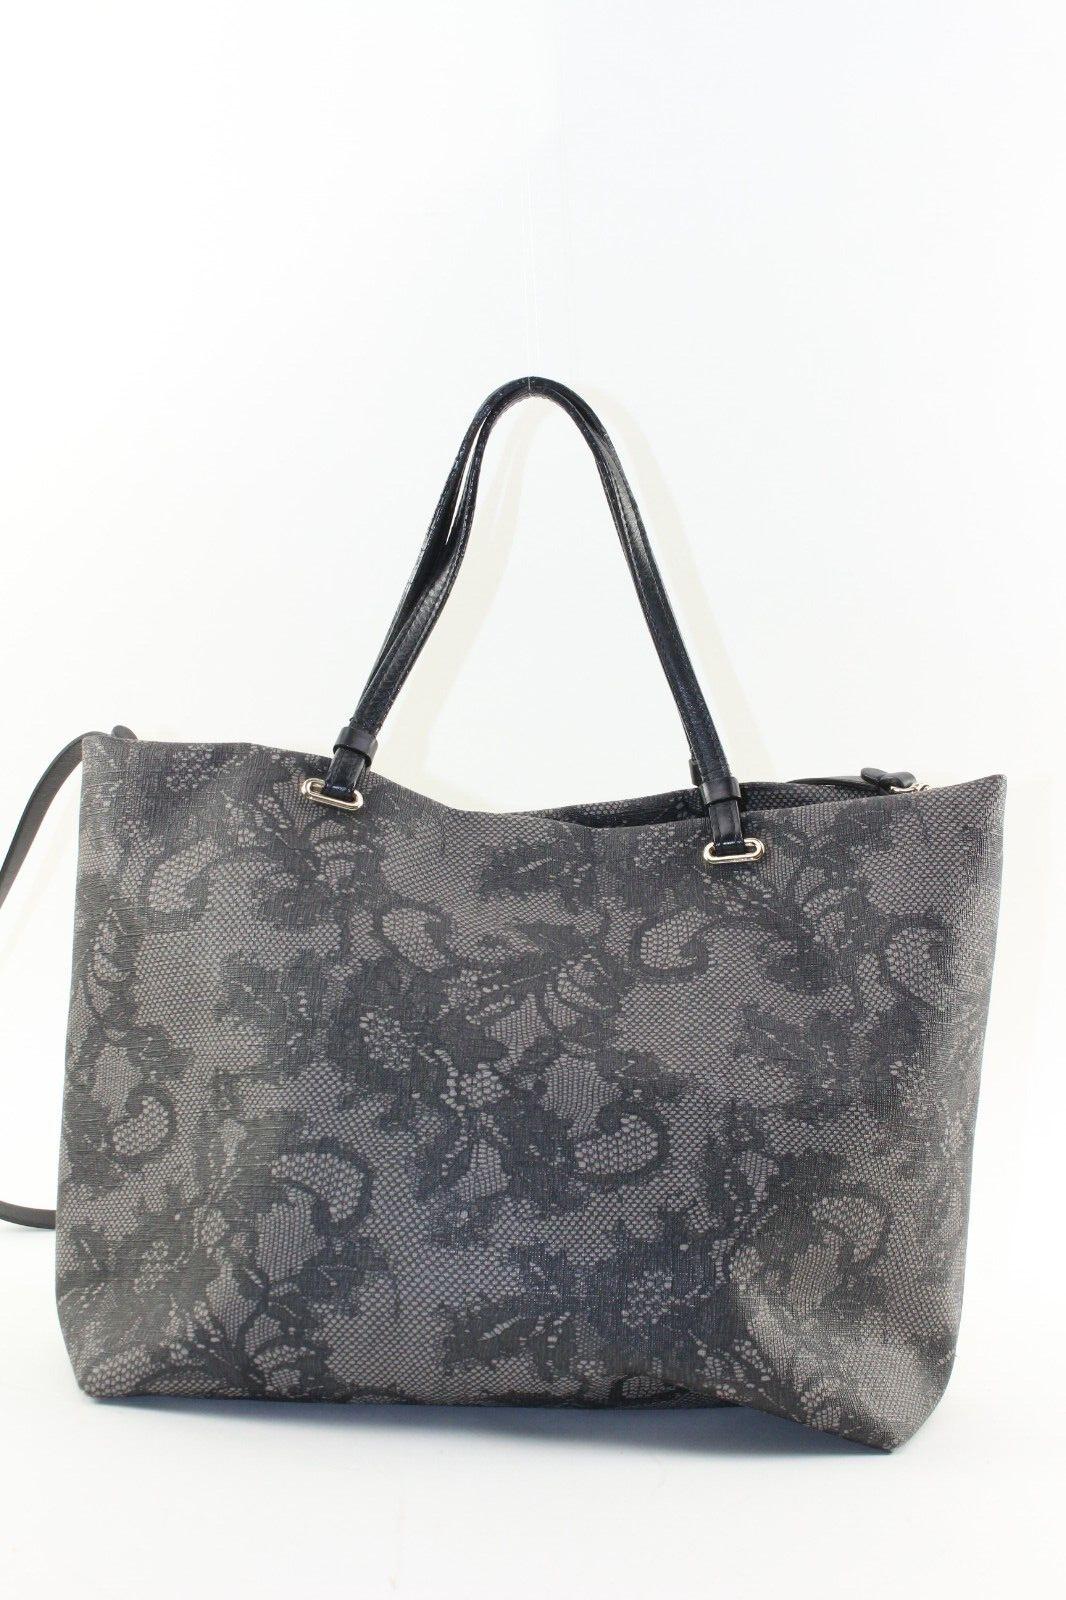 VALENTINO Lace Pattern 2way Tote with Strap 2VAL1220K In Good Condition For Sale In Dix hills, NY